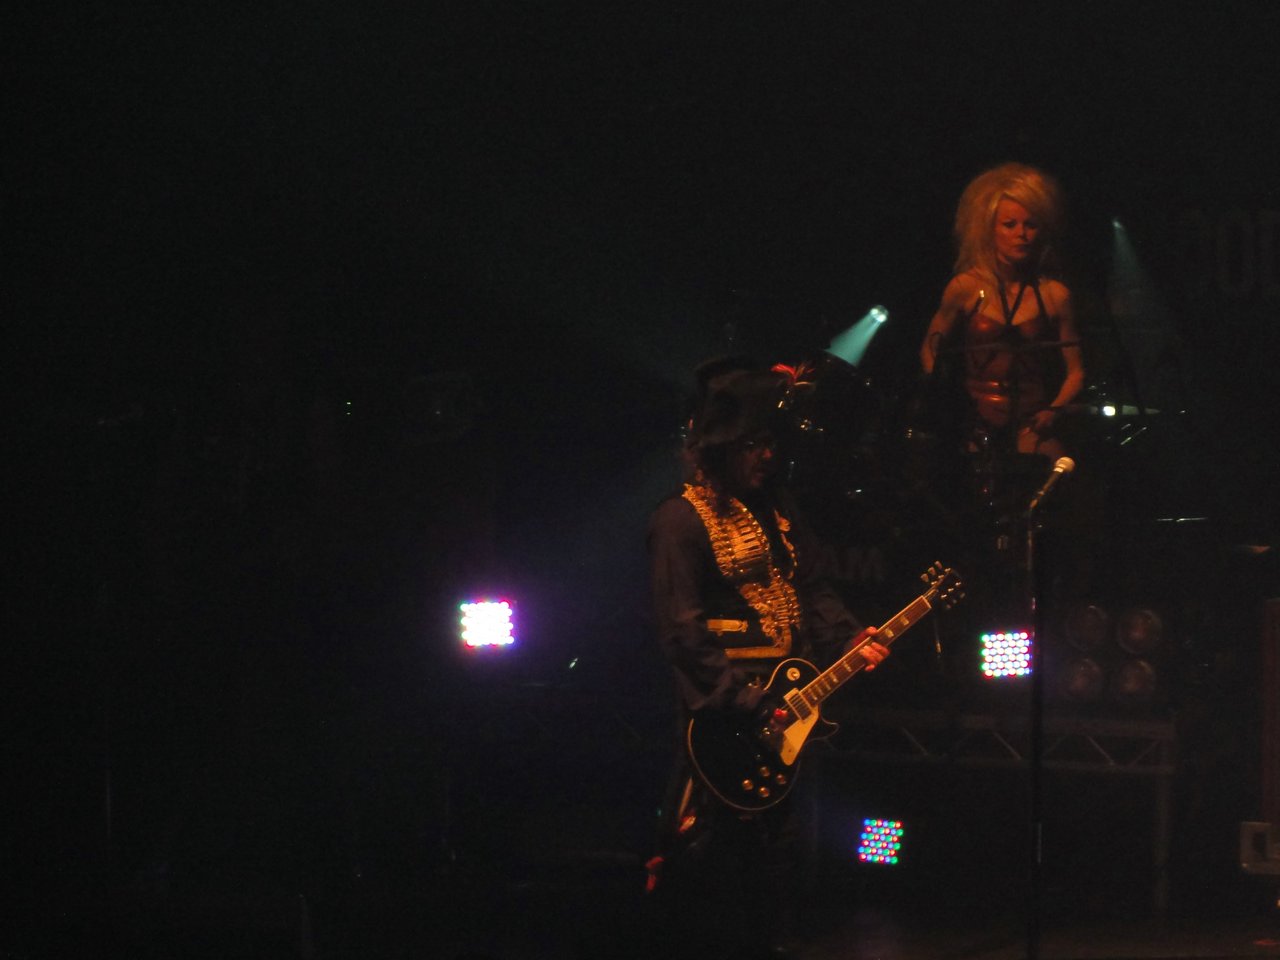 08 Adam Ant at the Roundhouse.jpg